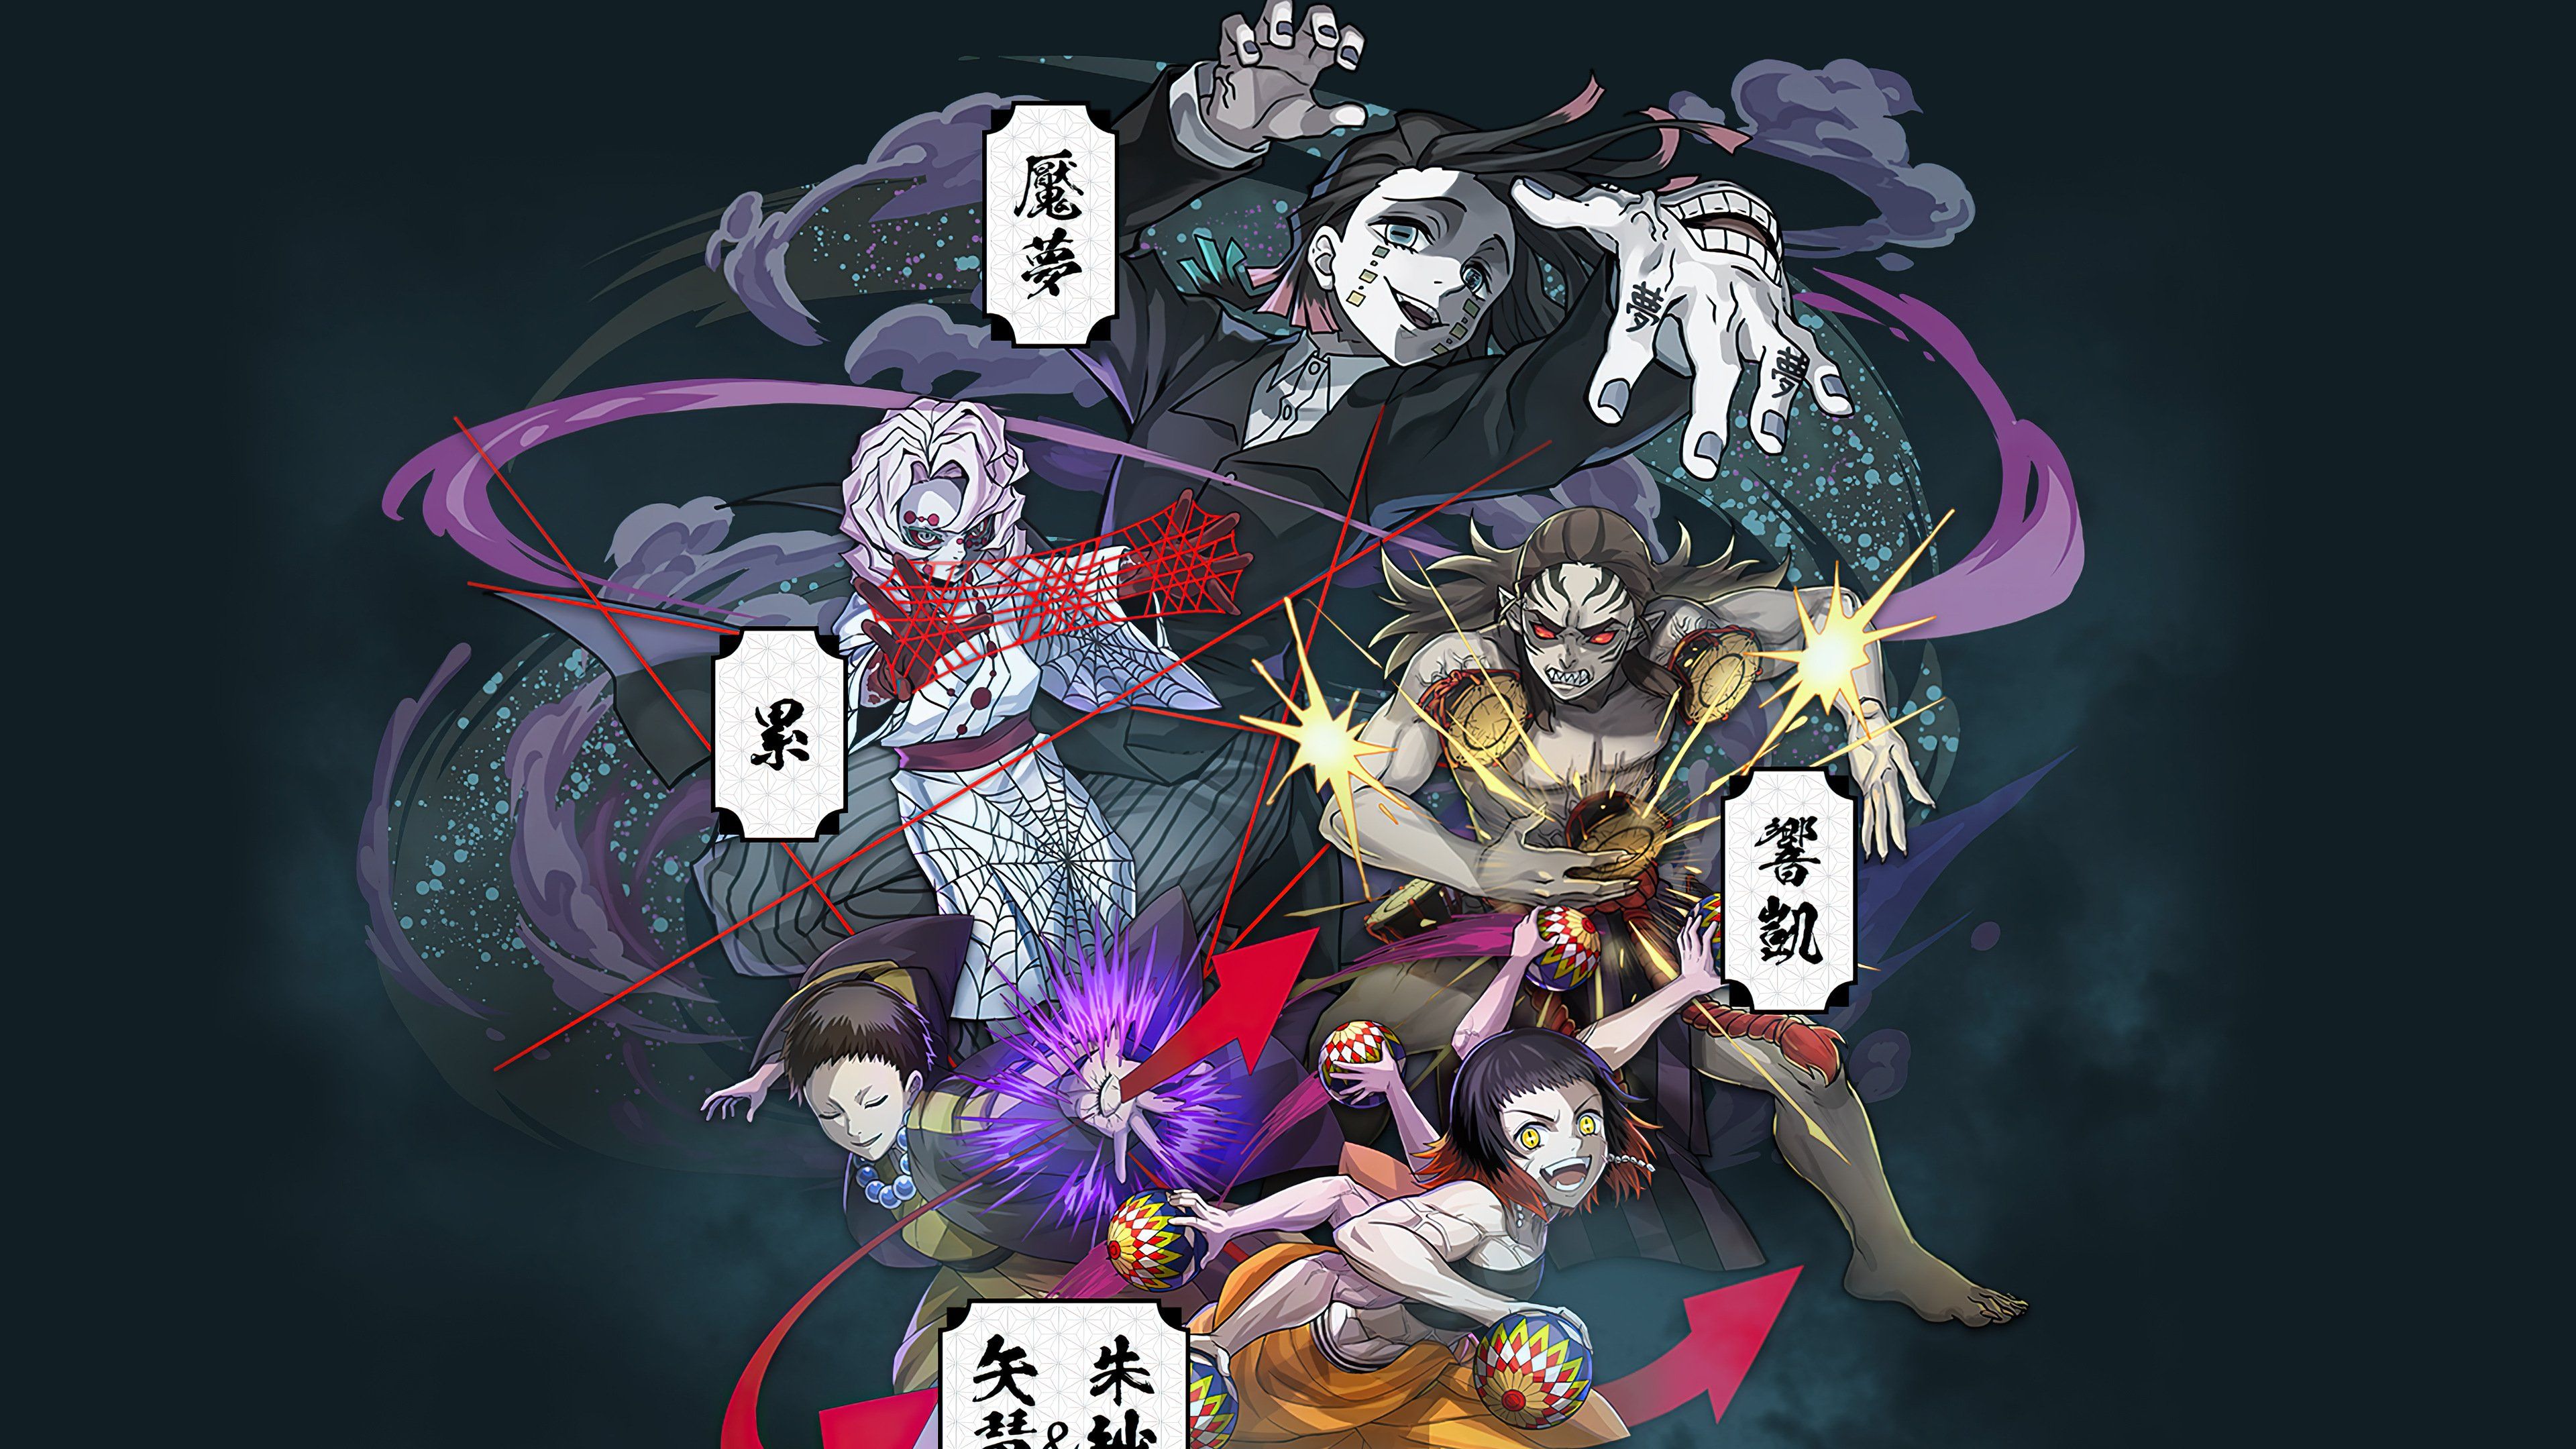 A colorful illustration of characters from the game 